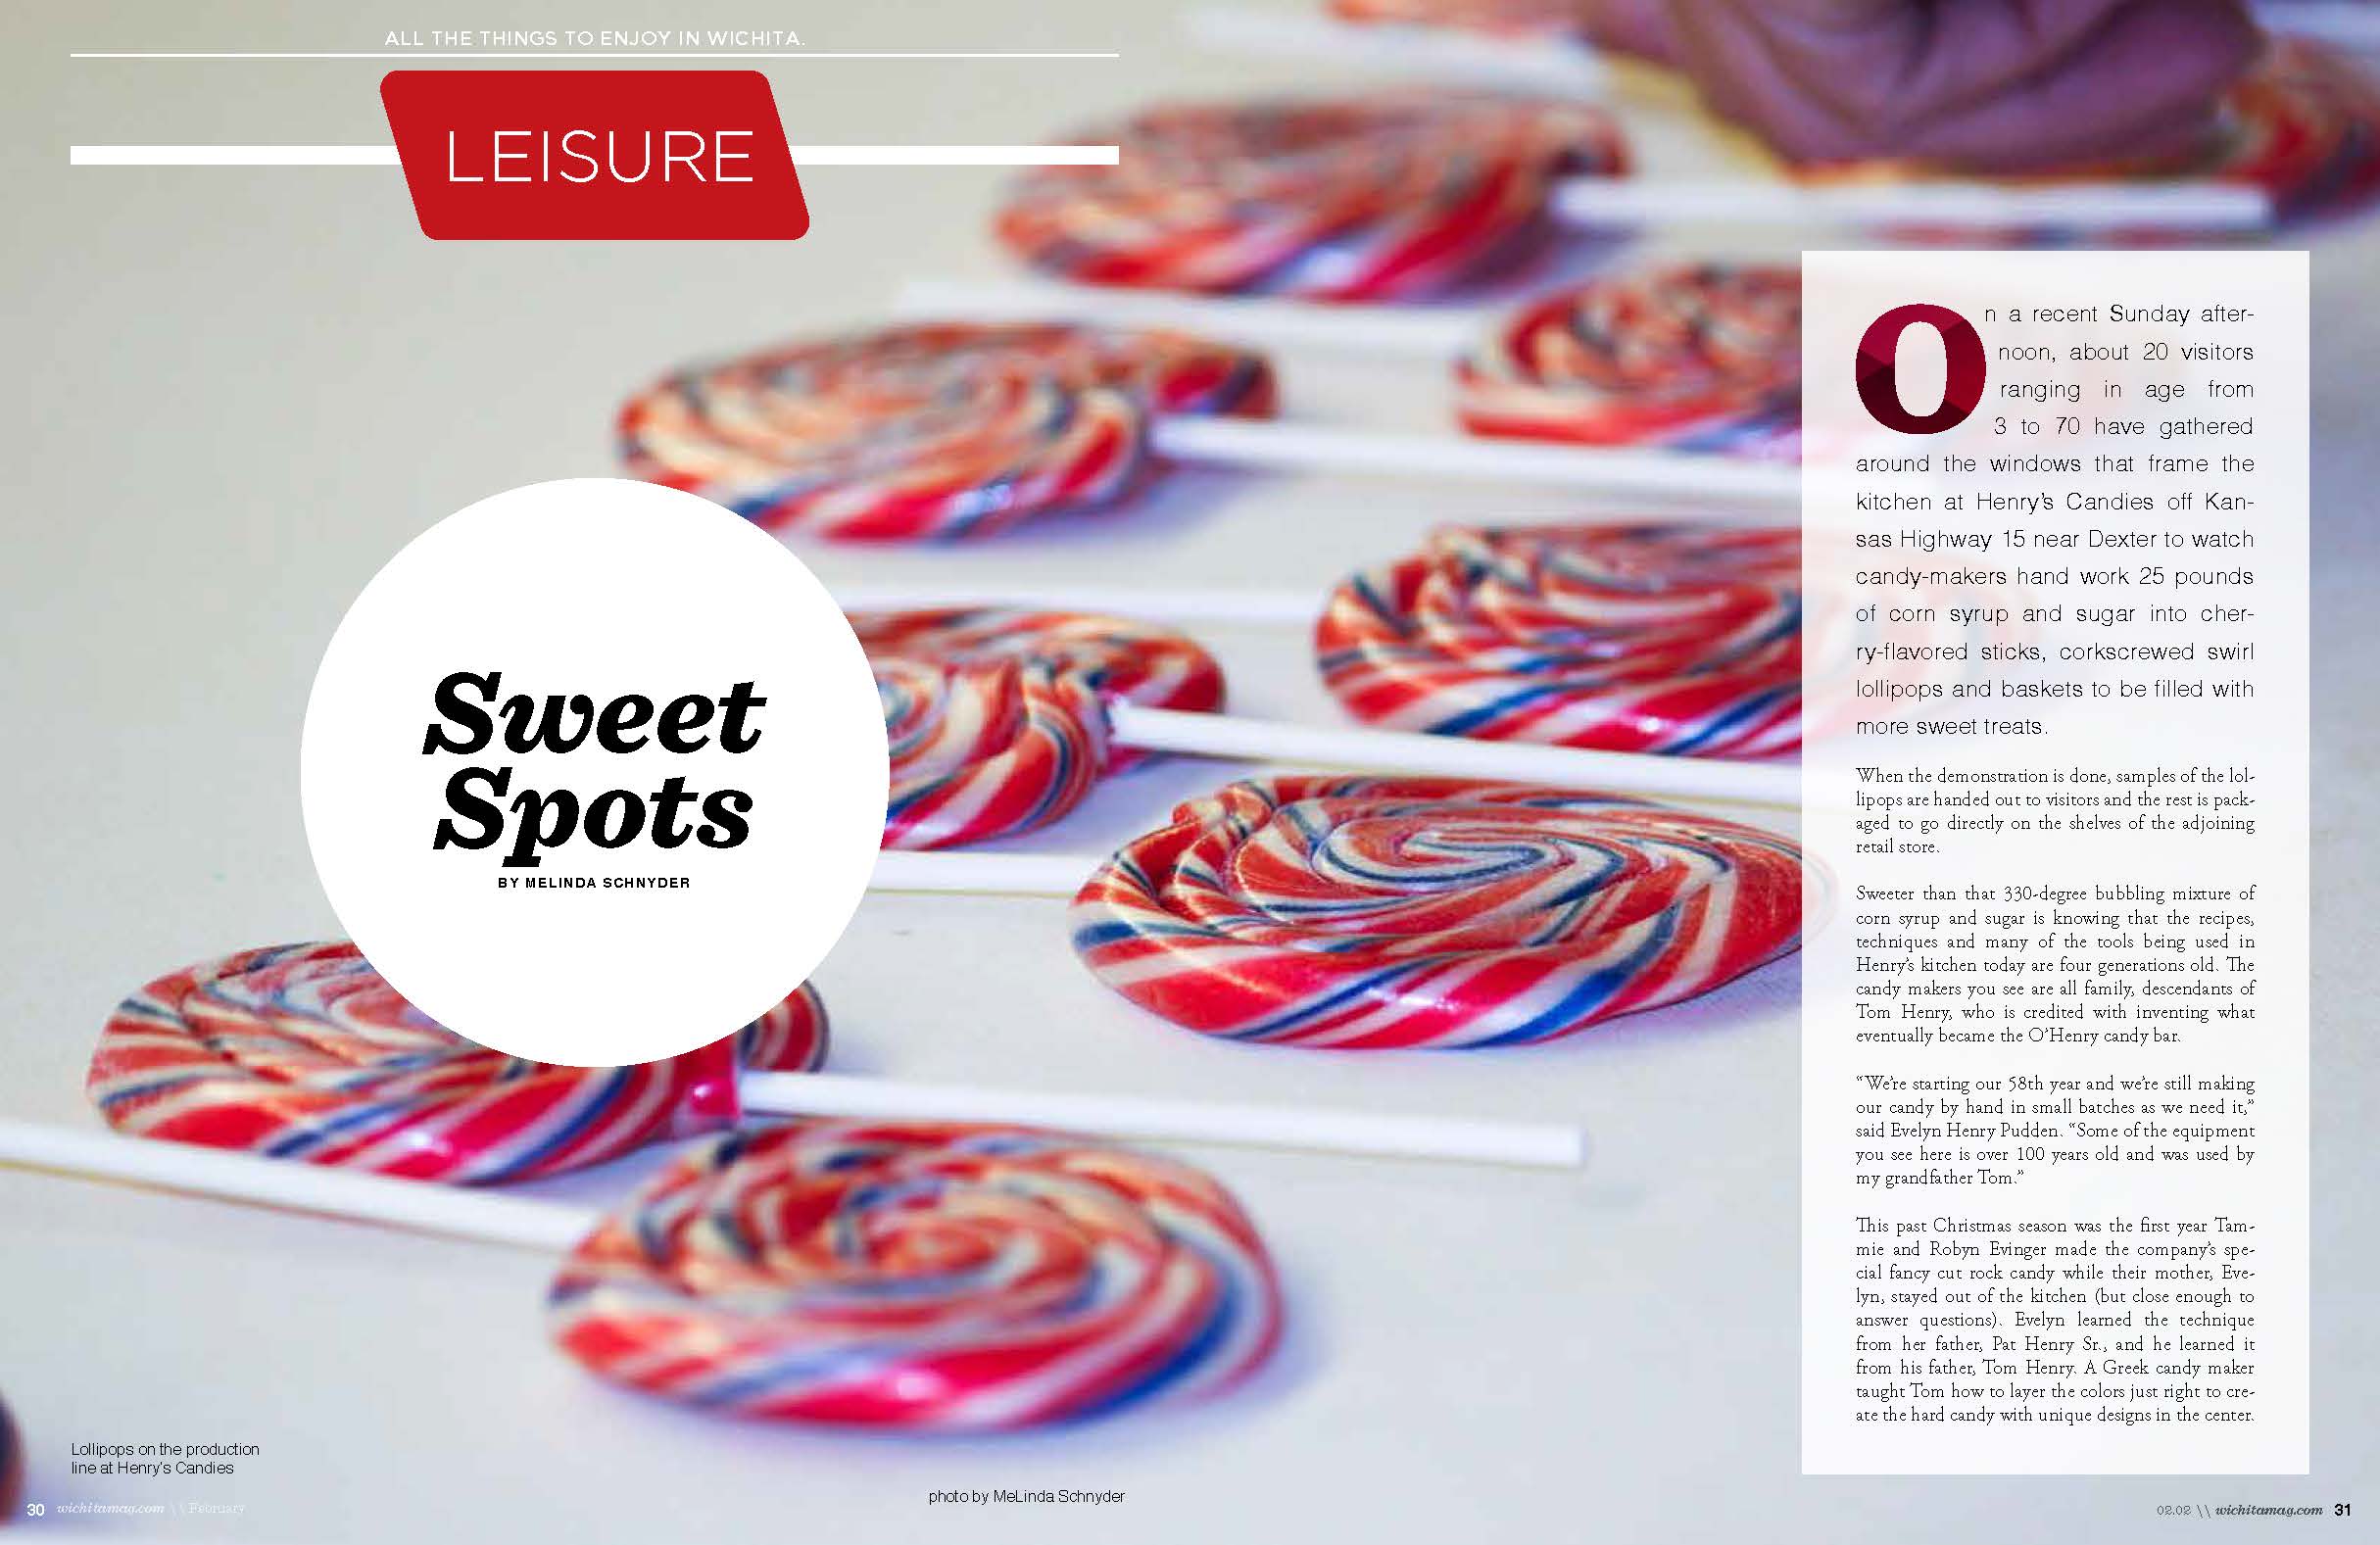 Wichita magazine travel article on candy and chocolate shops in the region that offer tours